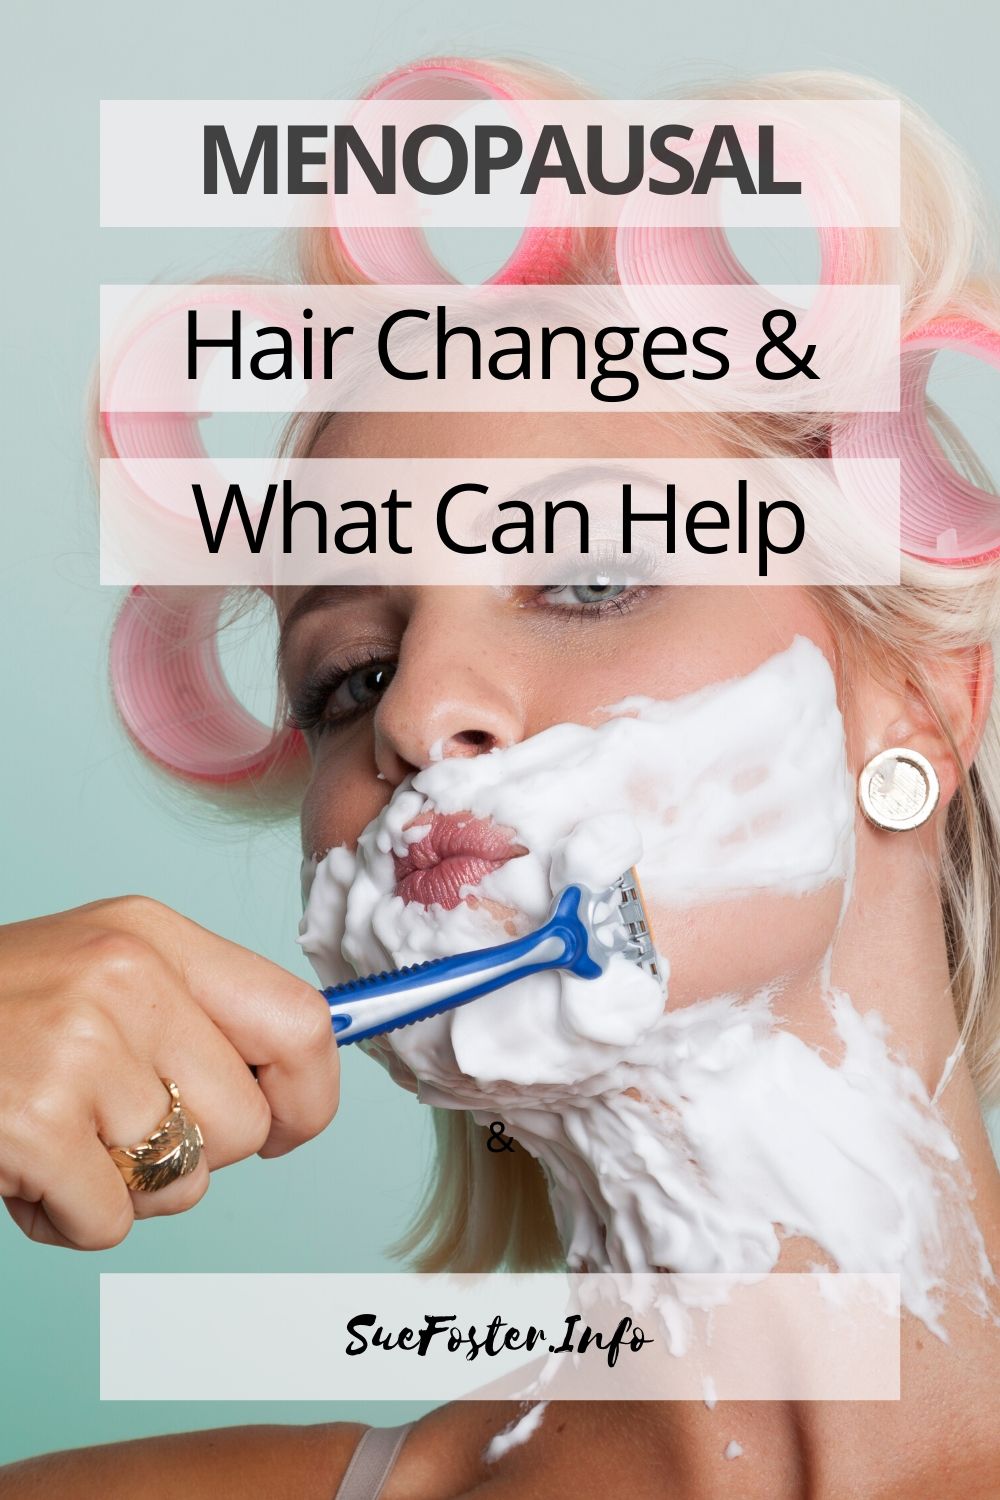 Menopausal Hair Changes and What Can Help